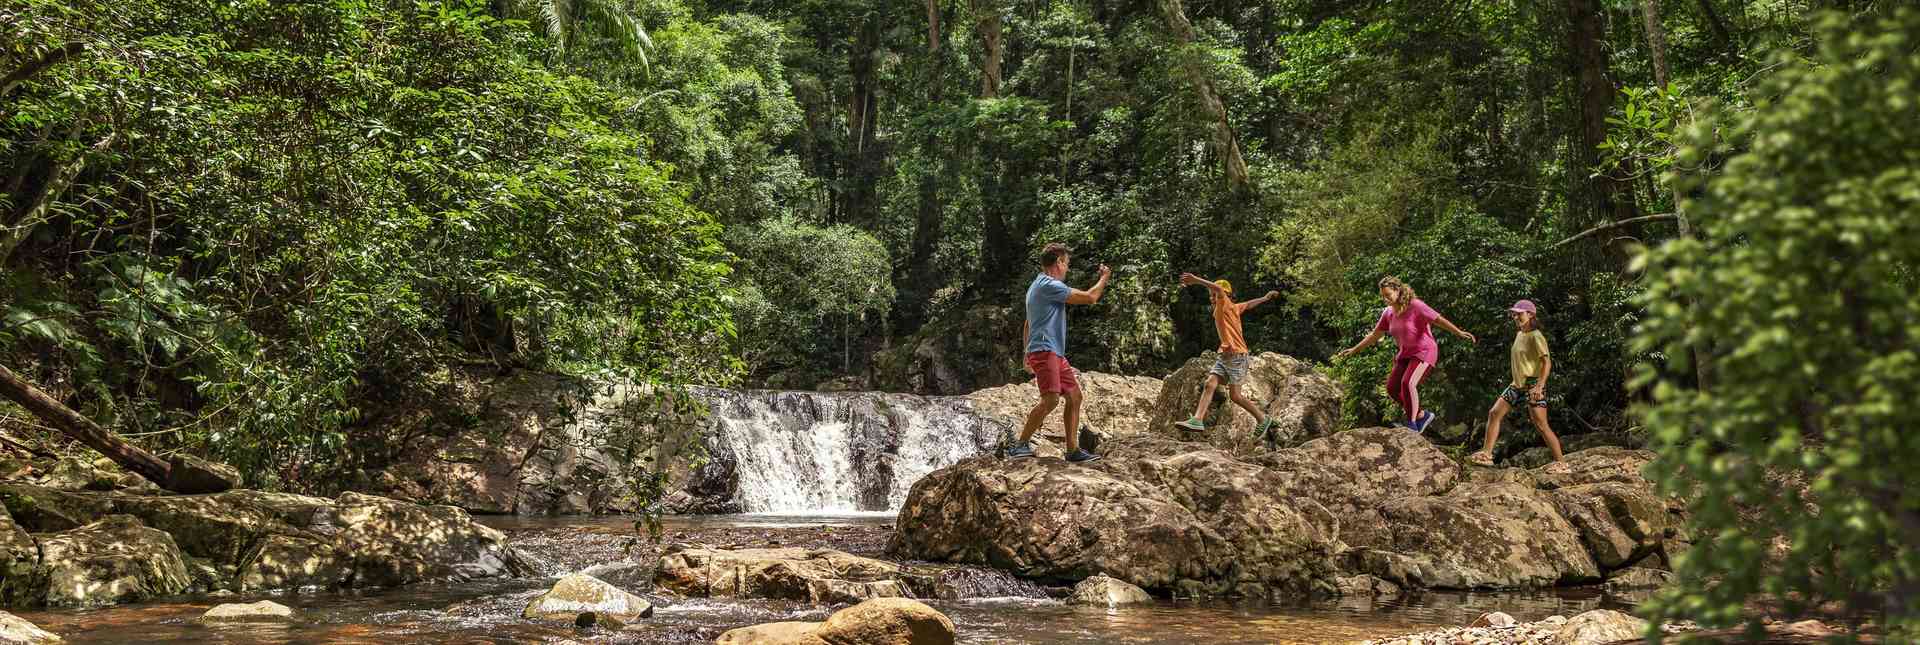 Ultimate Gold Coast Adventure Guide: From Beach to Hinterland